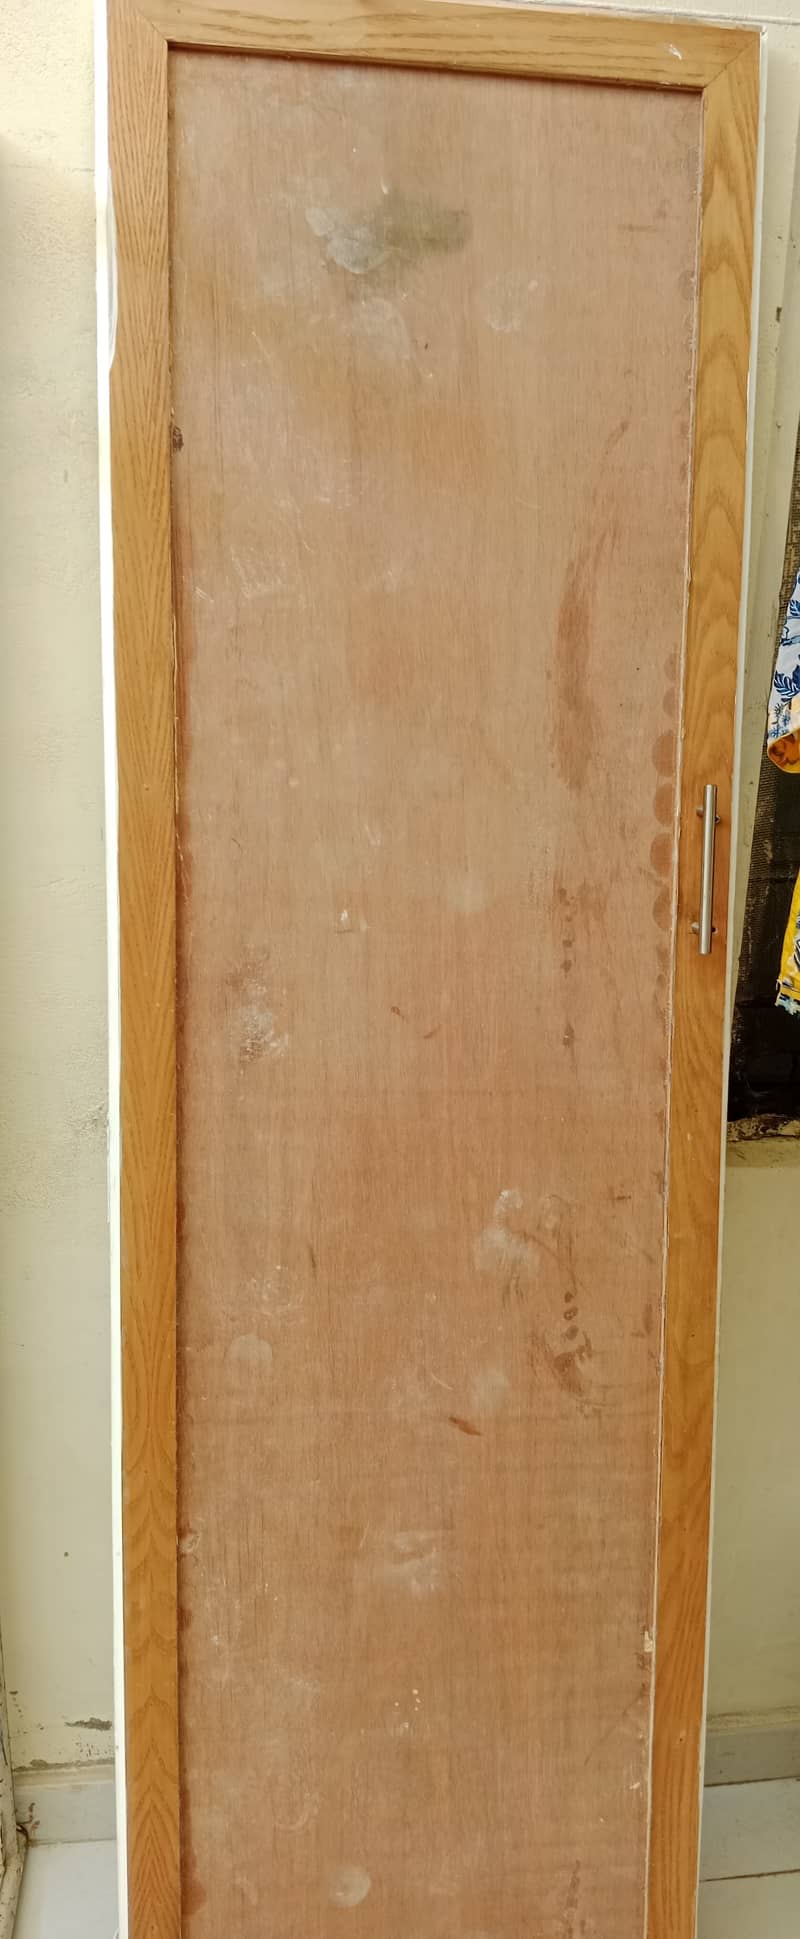 Door for sale neat and clean only WhatsUp 03060103003 16